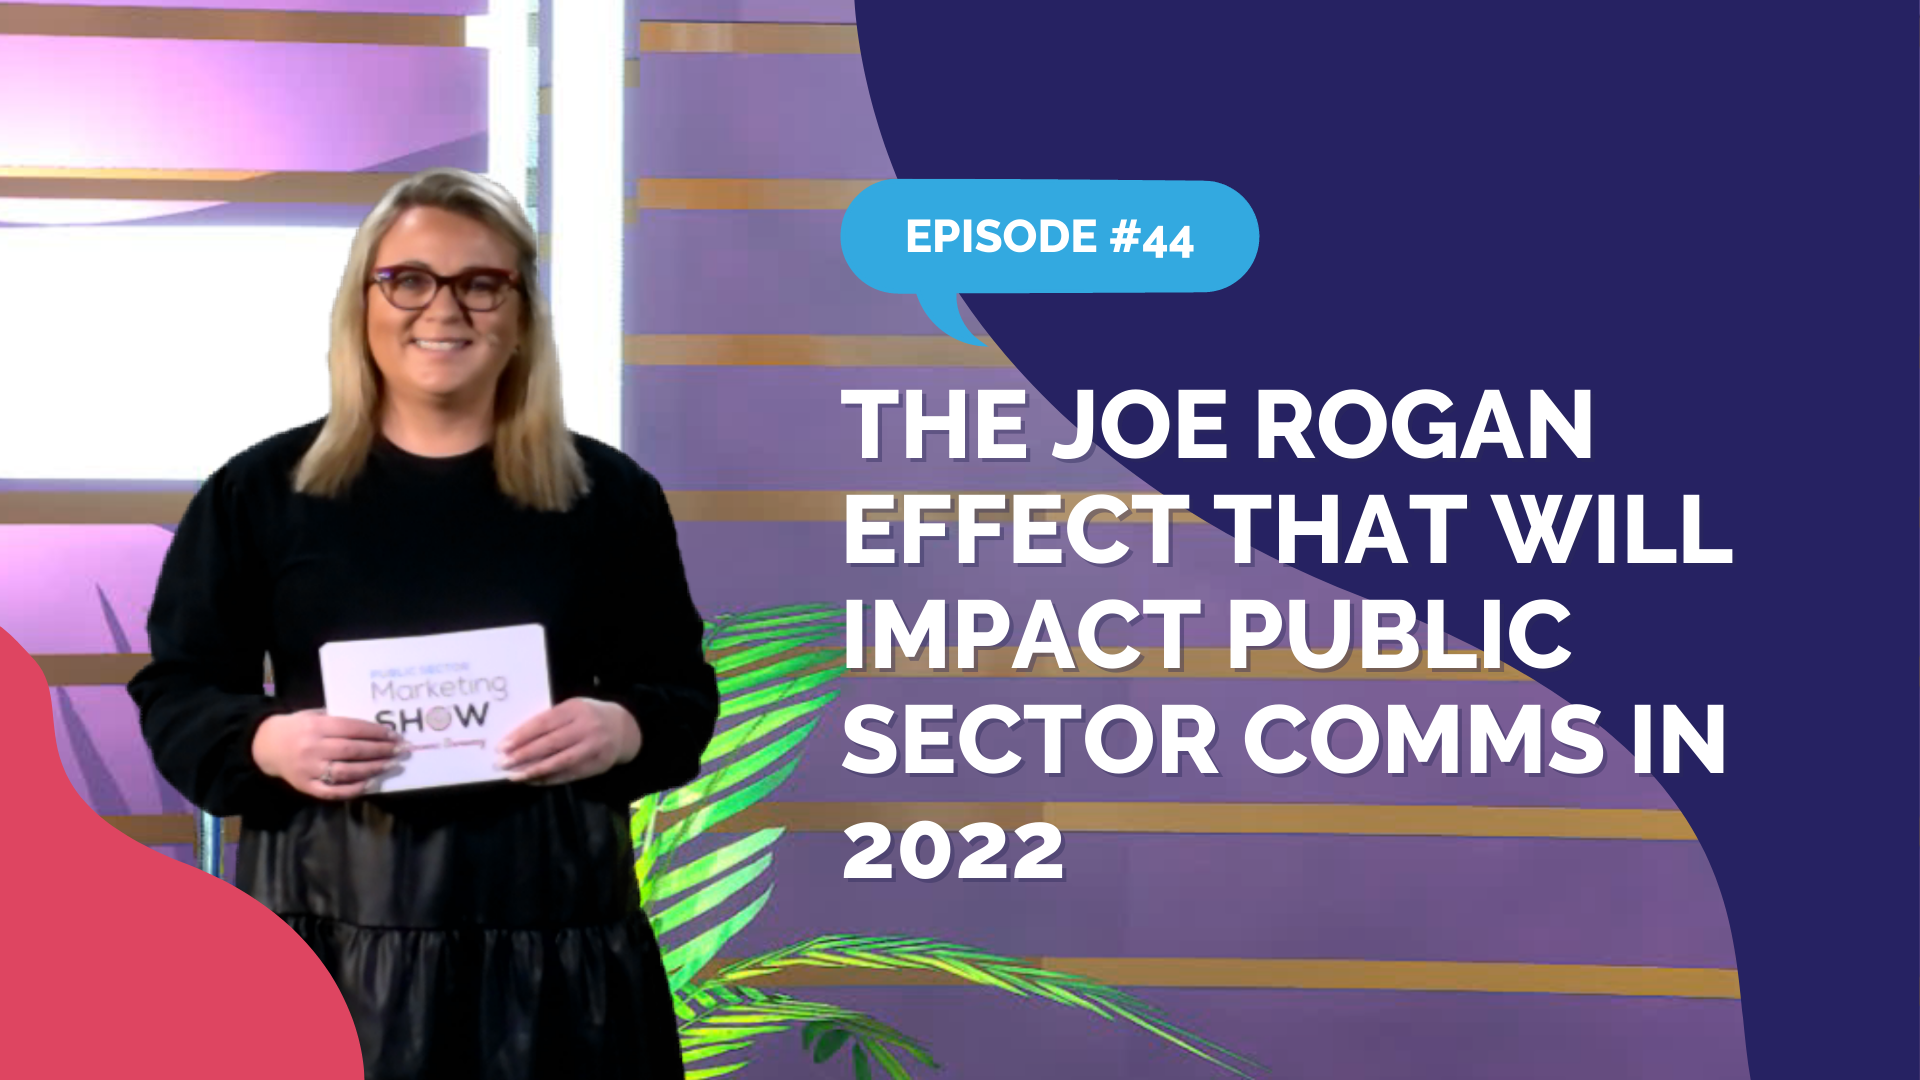 Episode 44 - The Joe Rogan Effect That Will Impact Public Sector Comms in 2022